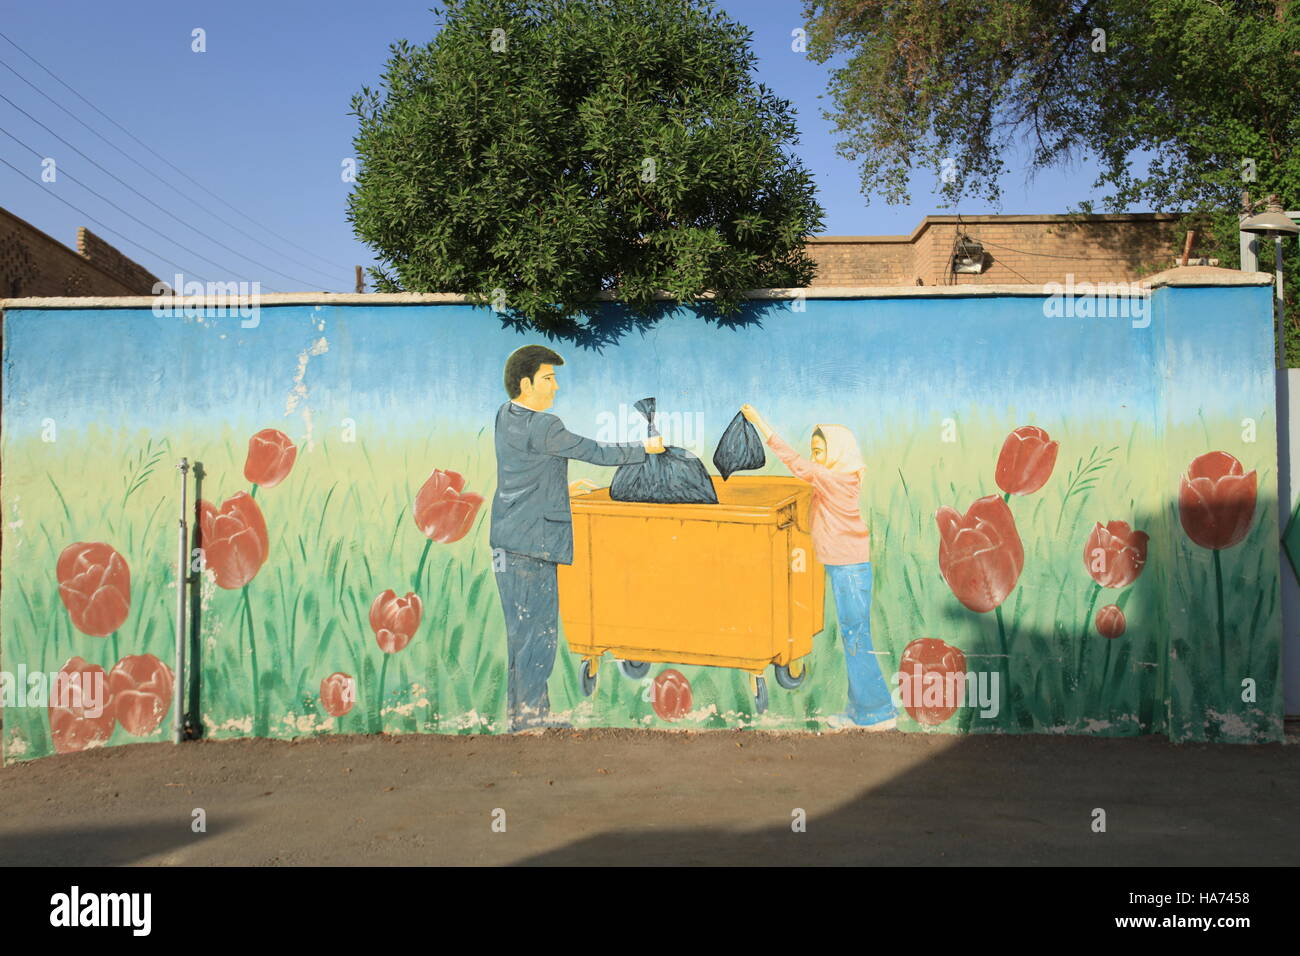 Mural promoting cleanness and clean environment, Shushtar, Iran. Stock Photo